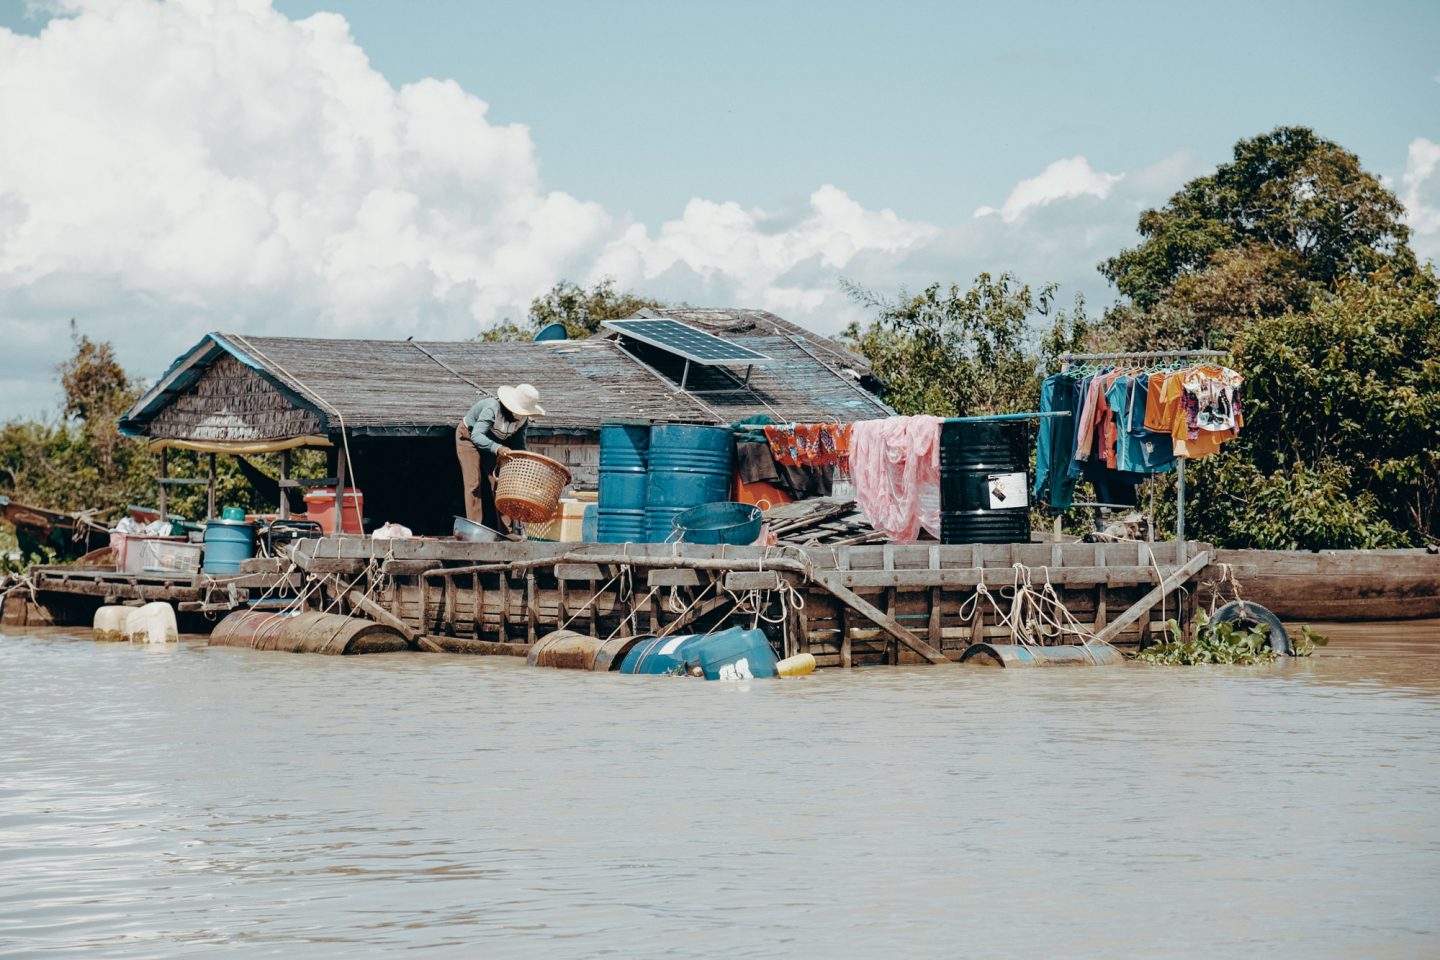 The Floating Villages of Tonle Sap Lake